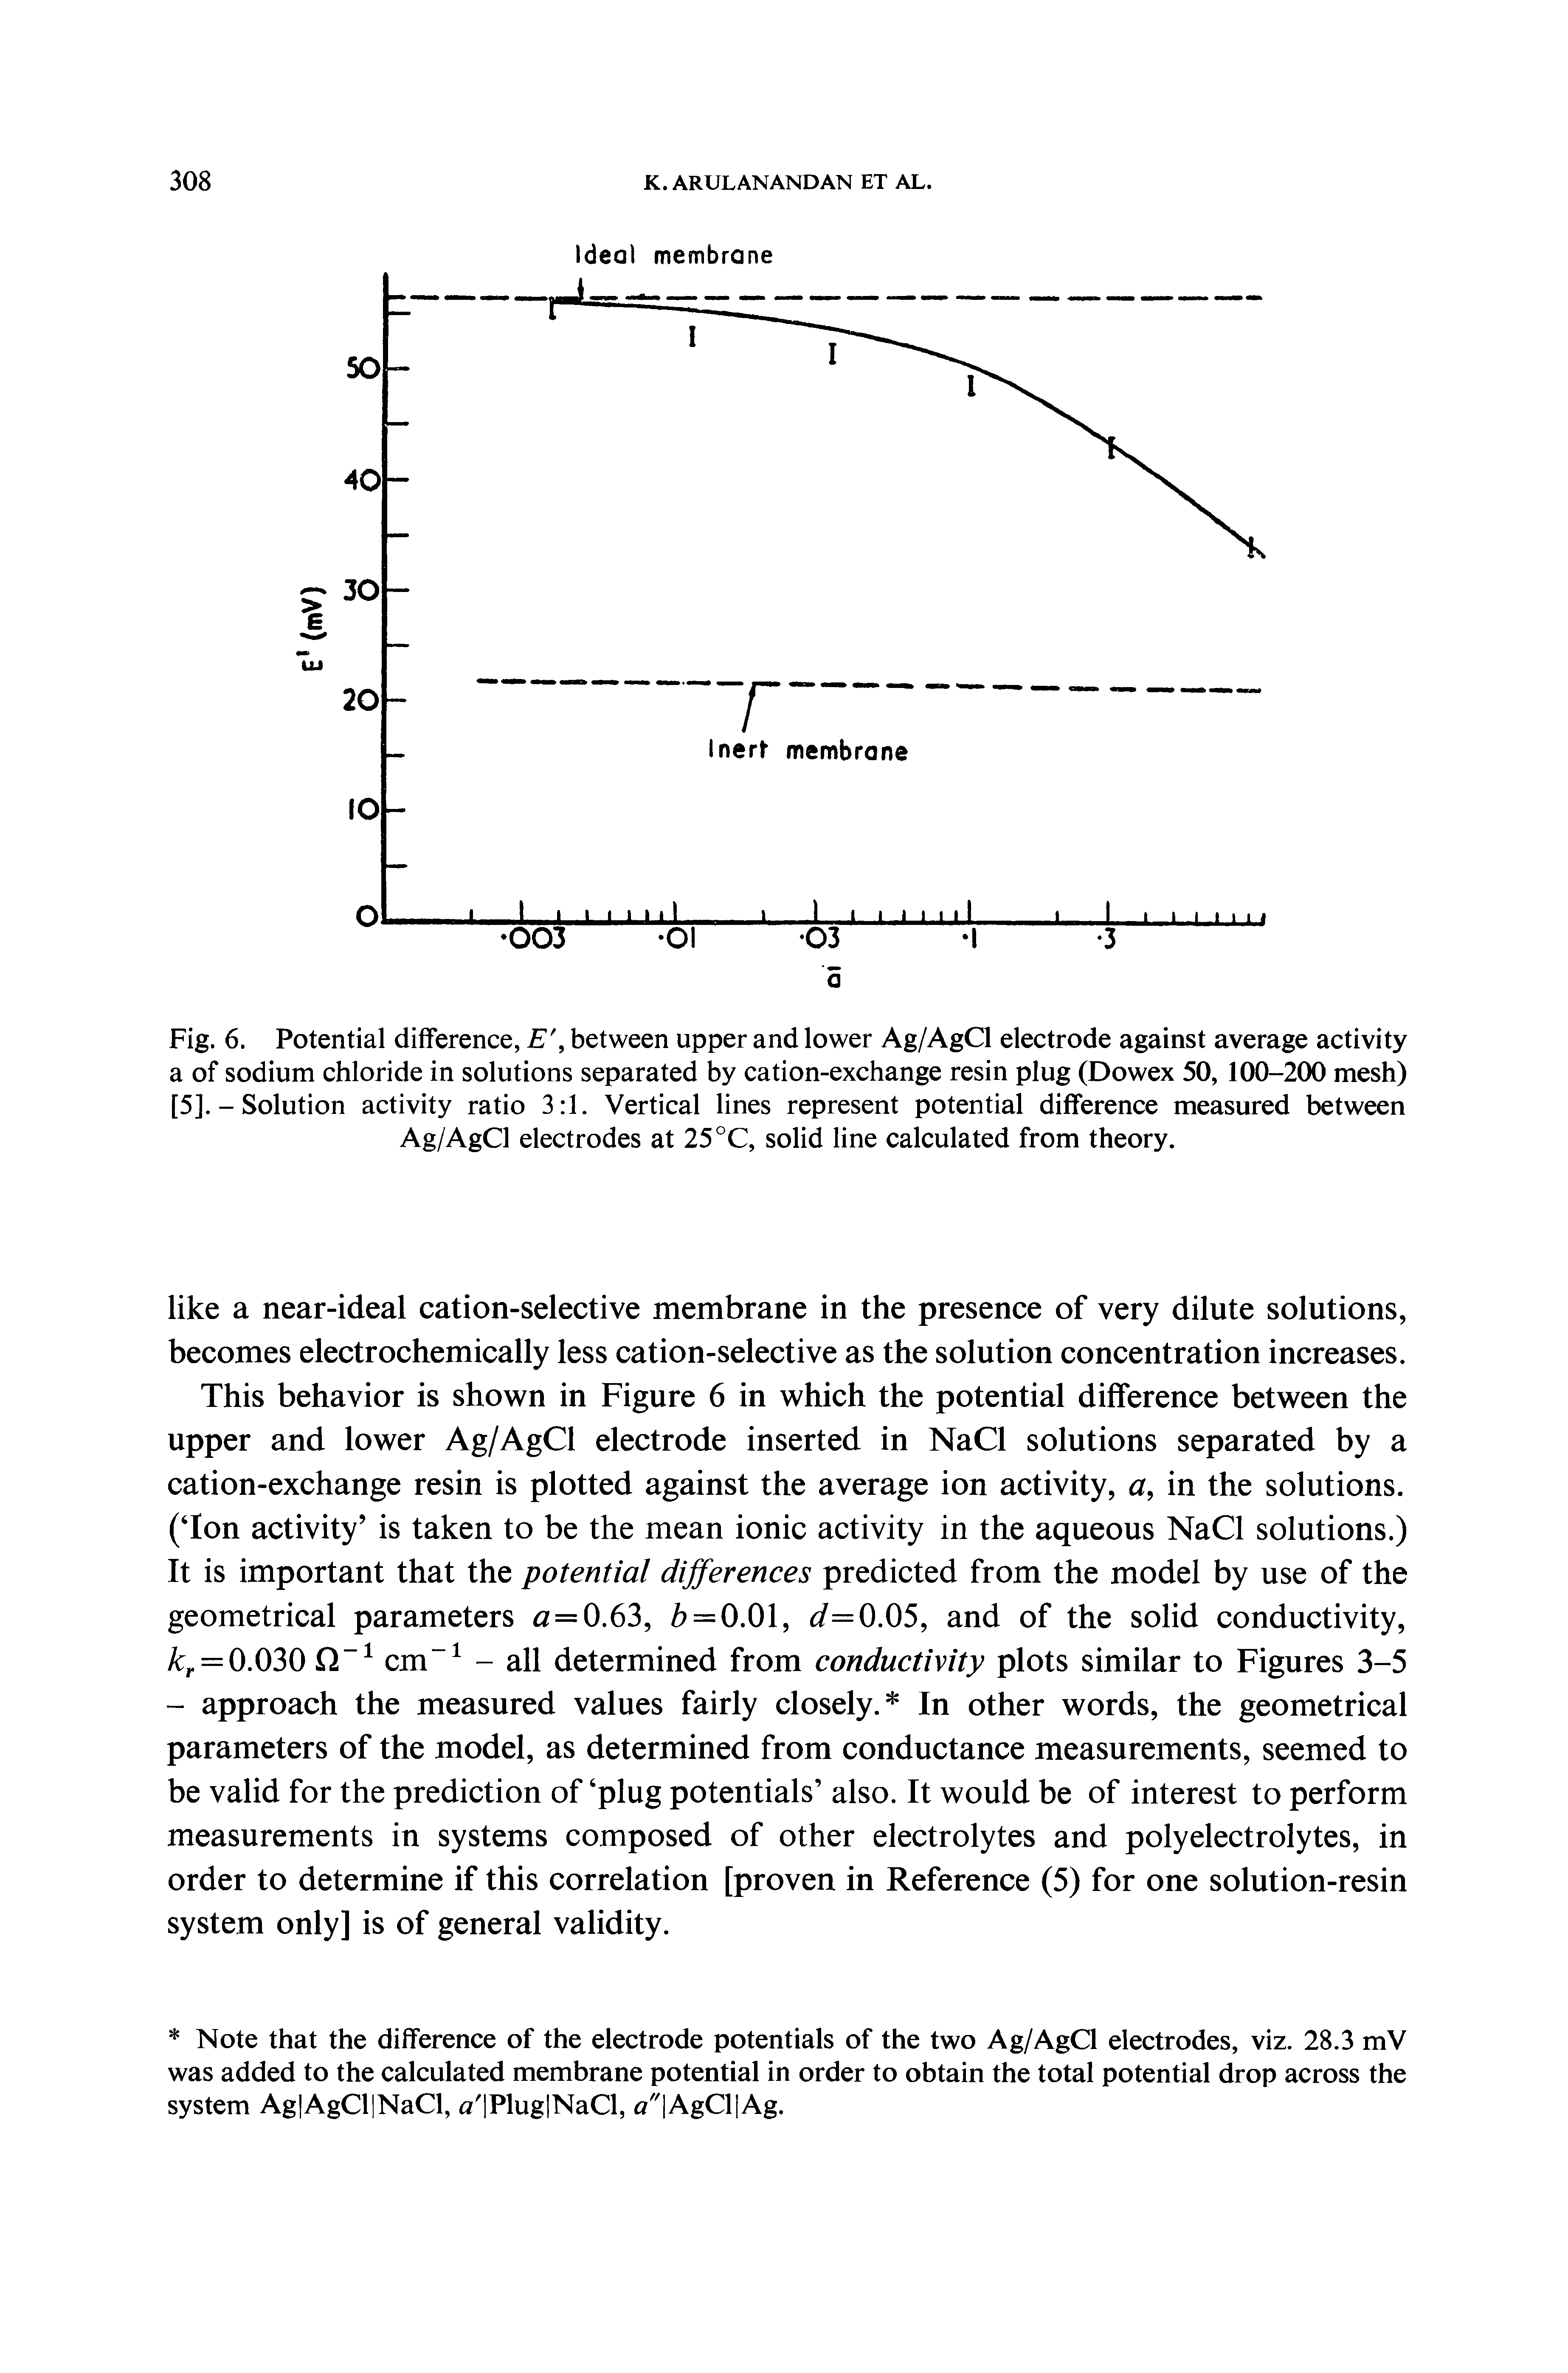 Fig. 6. Potential difference, E between upper and lower Ag/AgCl electrode against average activity a of sodium chloride in solutions separated by cation-exchange resin plug (Dowex 50,100-200 mesh) [5]. - Solution activity ratio 3 1. Vertical lines represent potential difference measured between Ag/AgCl electrodes at 25 °C, solid line calculated from theory.